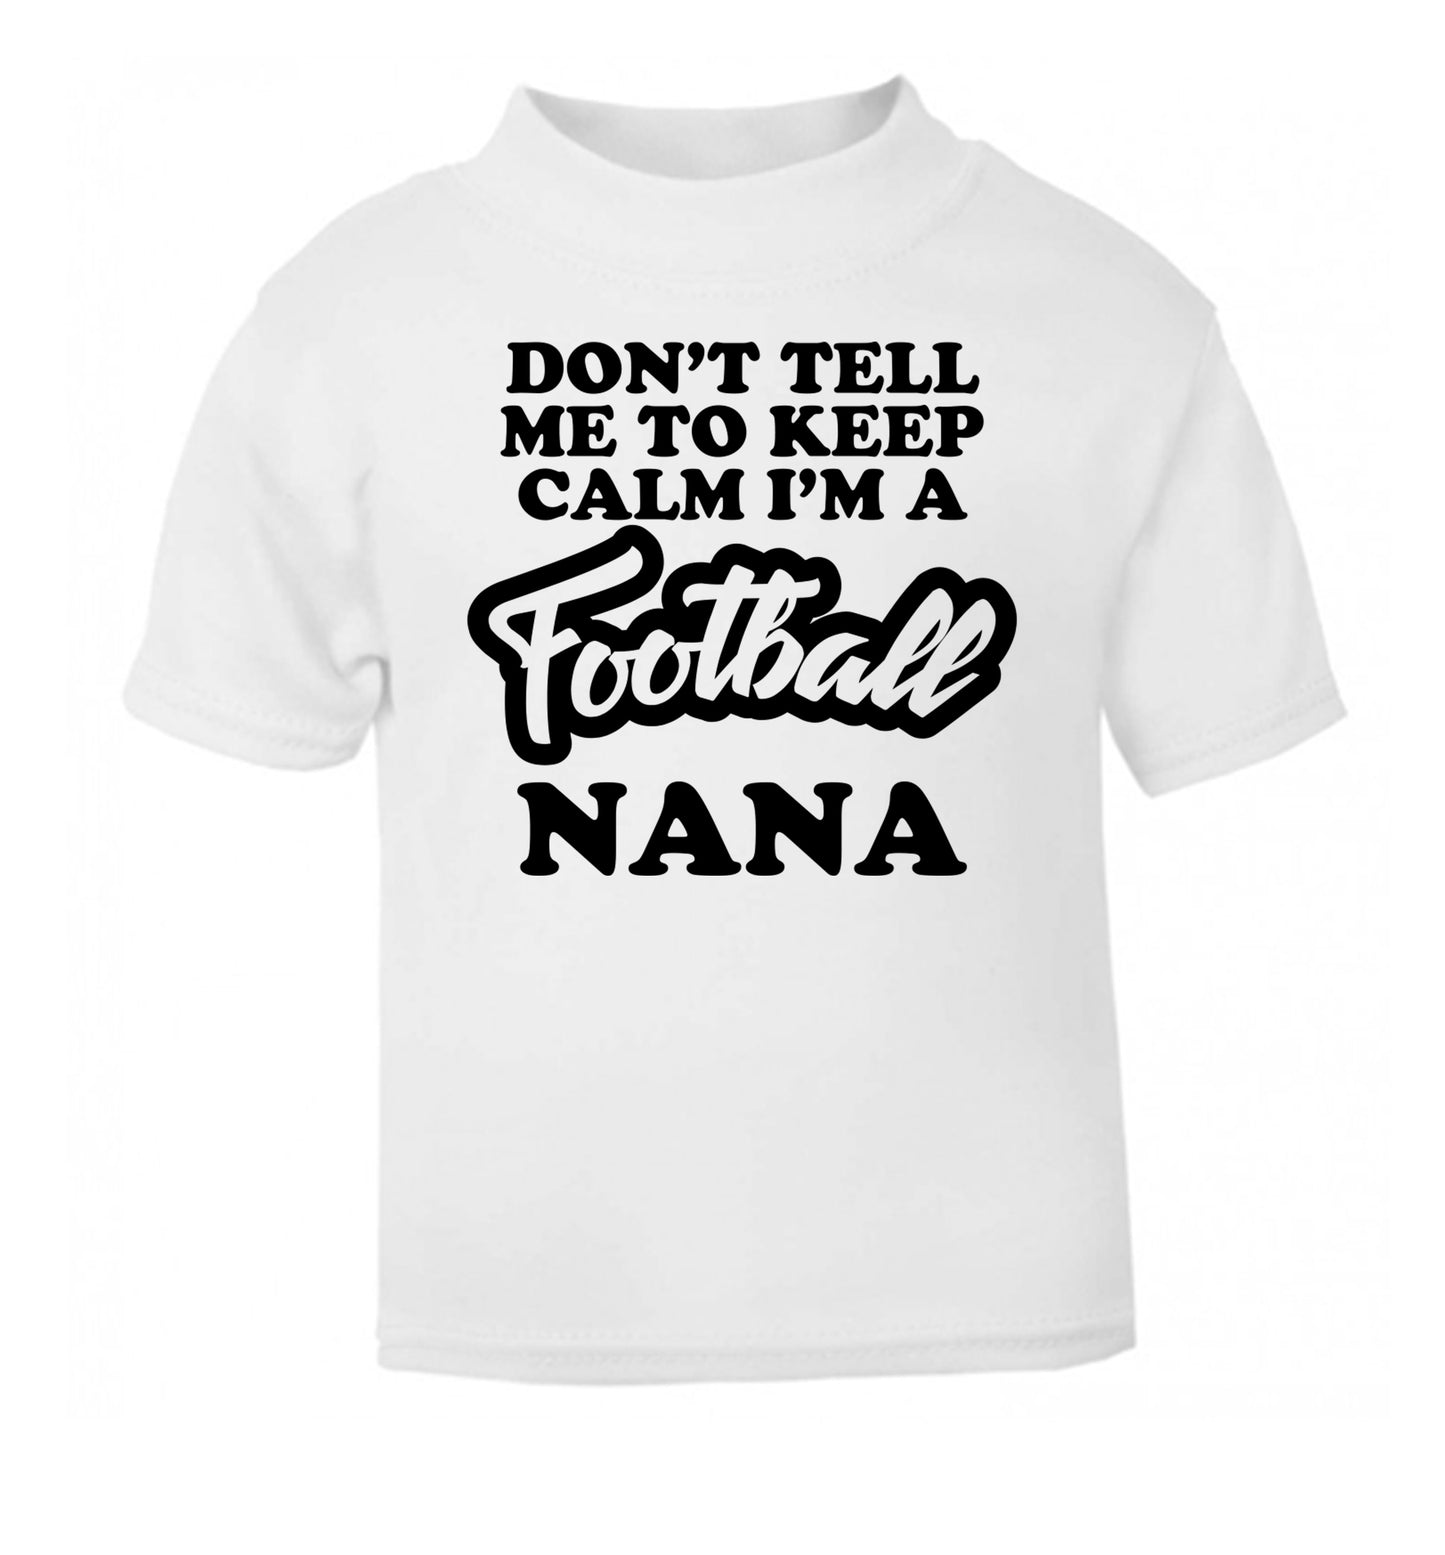 Don't tell me to keep calm I'm a football nana white Baby Toddler Tshirt 2 Years